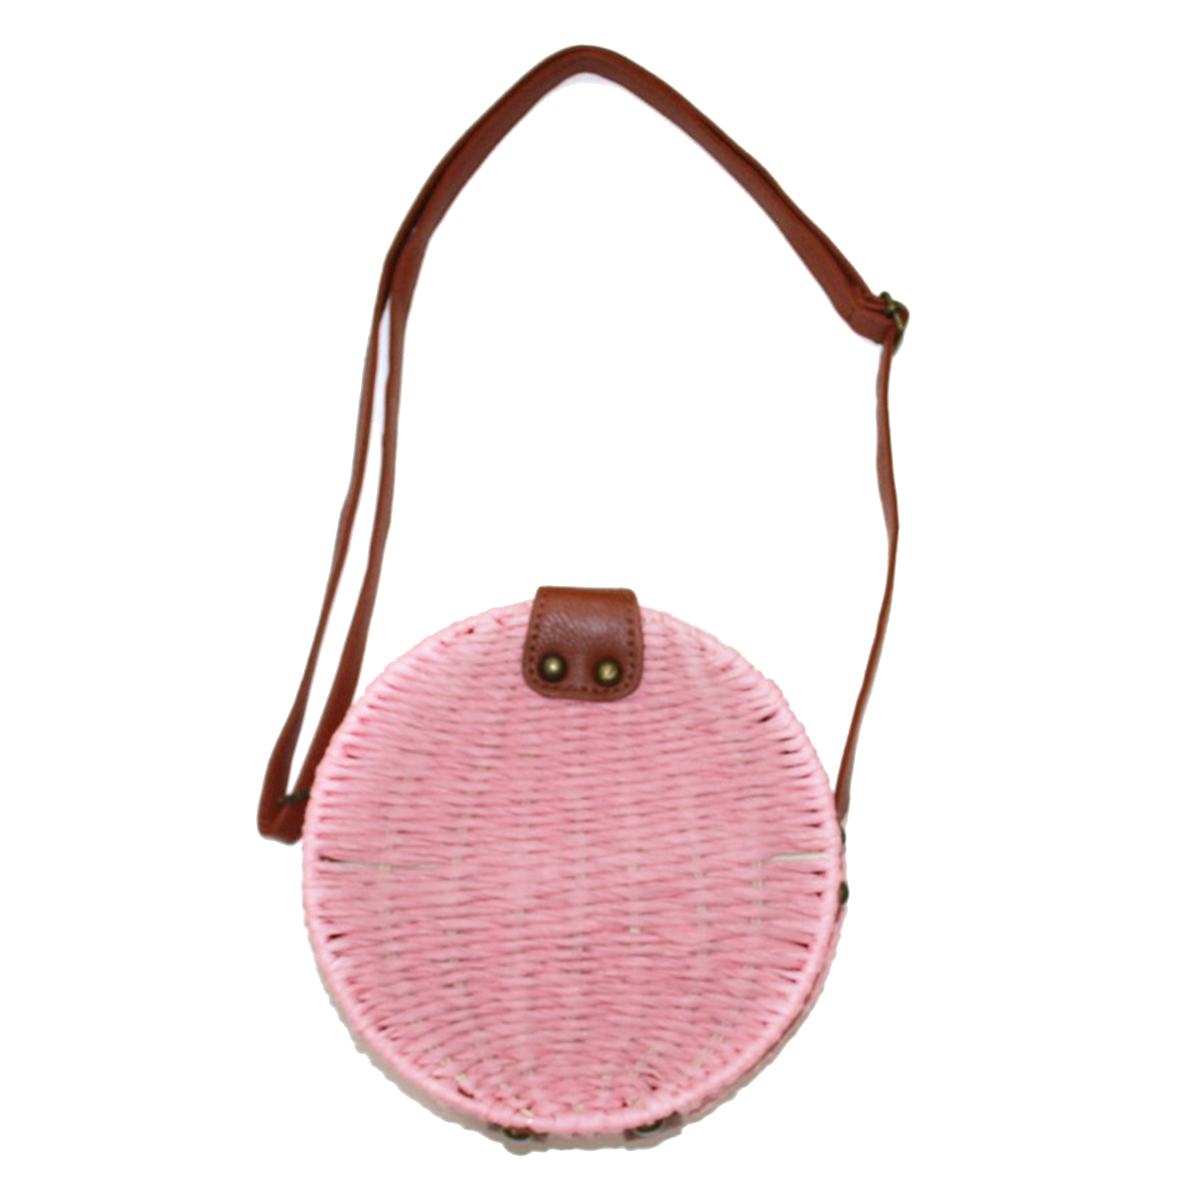 Handmade Light Summer Bag with Adjustable Shoulder Strap and Magnetic Clasp Opening (Size 18x18x7 Cm) - Pink